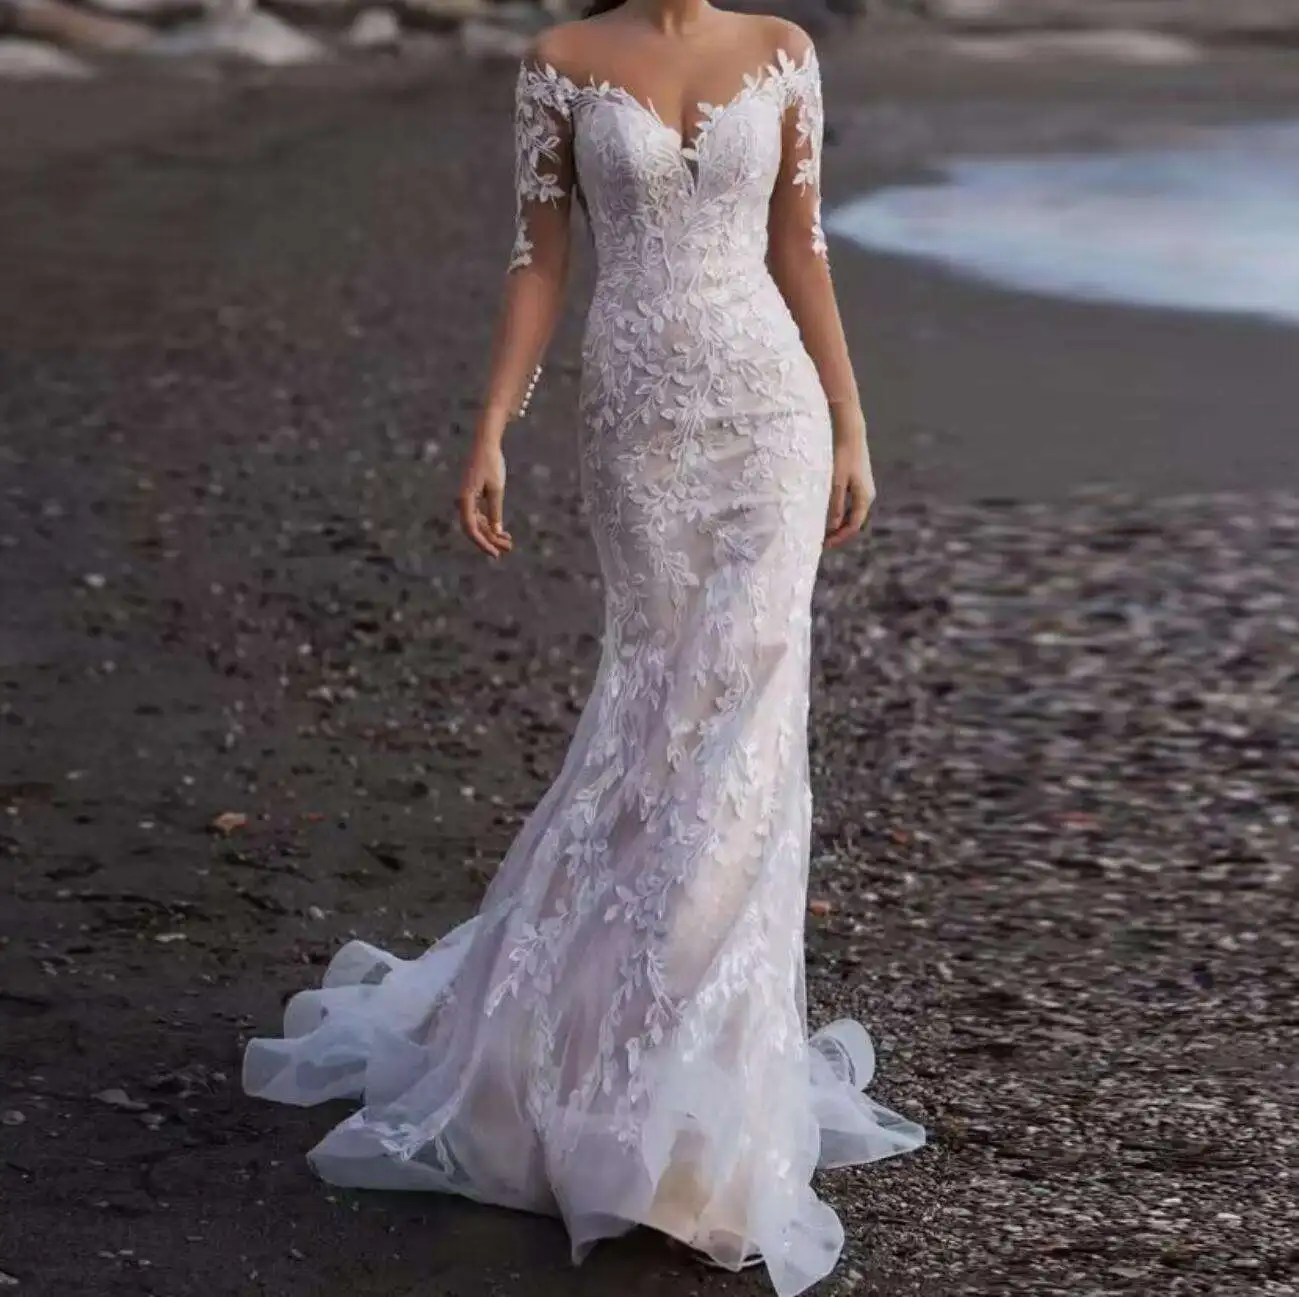 

Spring Lace Appliques Beach Mermaid Wedding Dress Vestidos Elegantes Para Mujer Buttons Back Long Sleeves Bridal Gowns